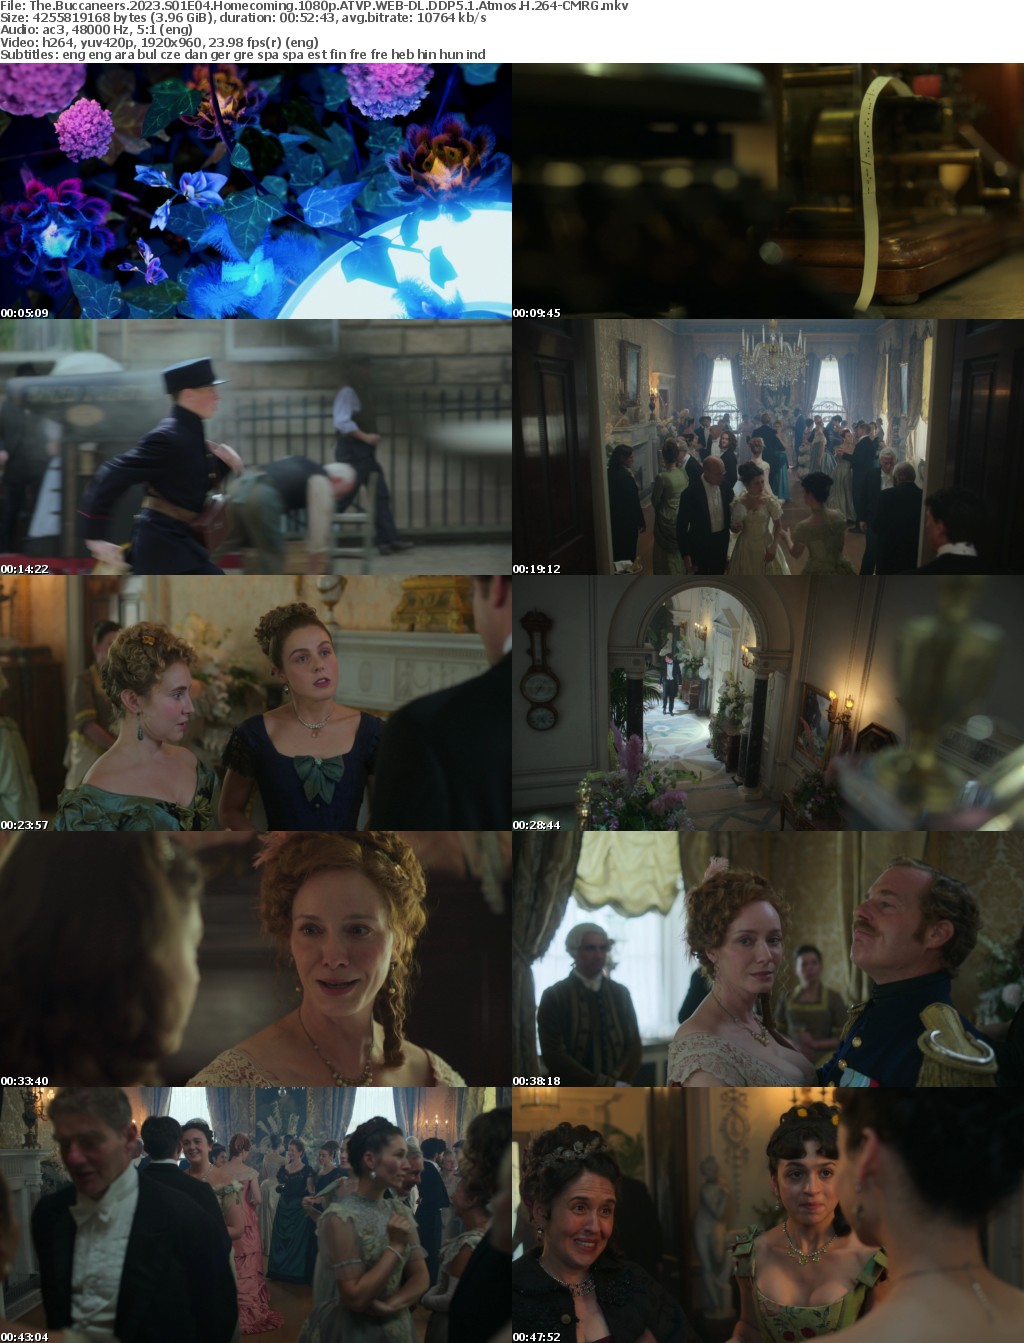 The Buccaneers 2023 S01E04 Homecoming 1080p ATVP WEB-DL DDP5 1 Atmos H 264-CMRG